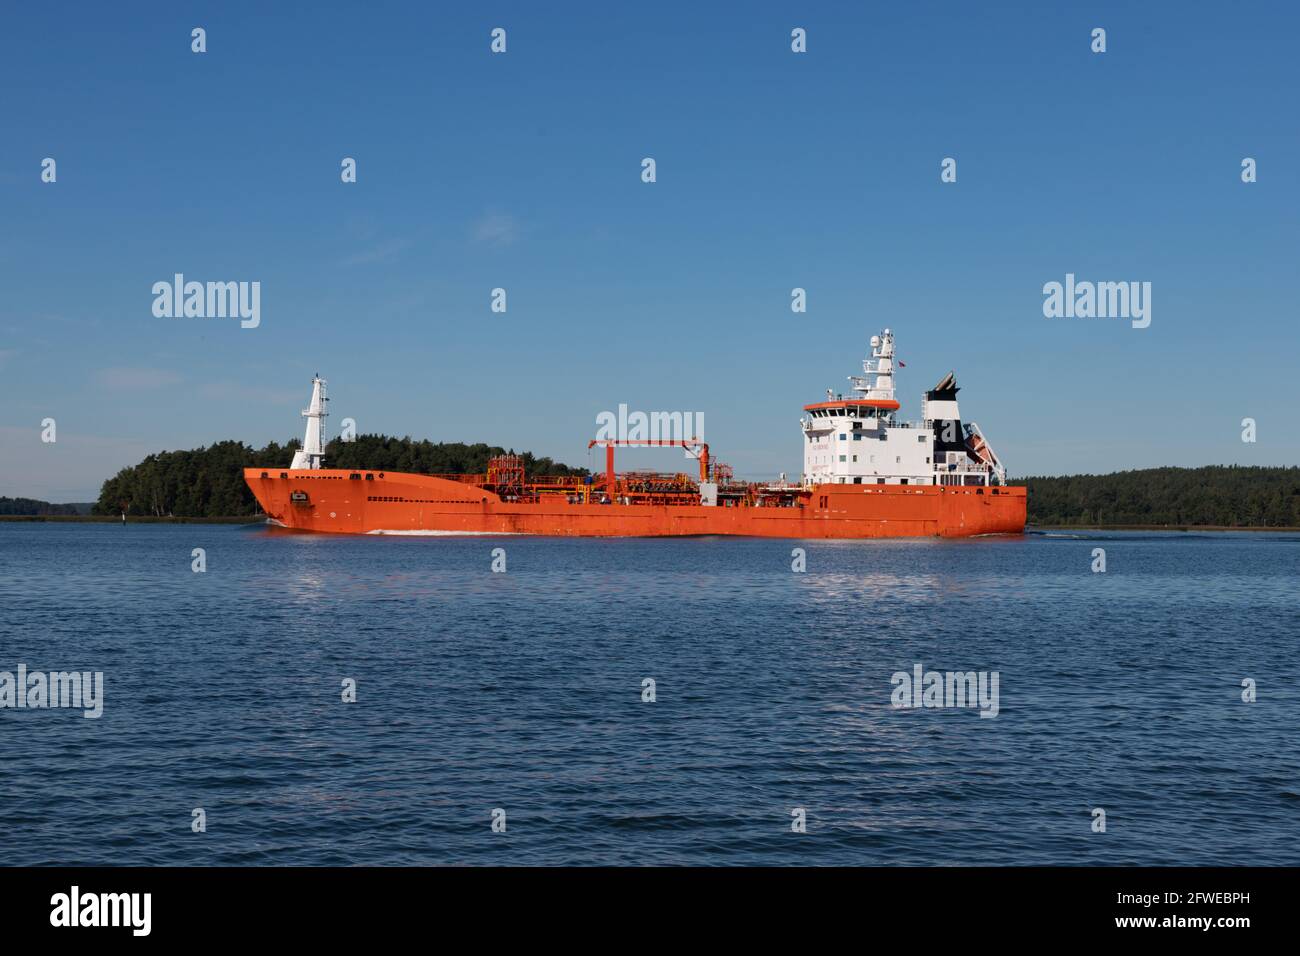 Orange oil/chemical tanker leaving Naantali oil refinery and passing Ruissalo island. Stock Photo